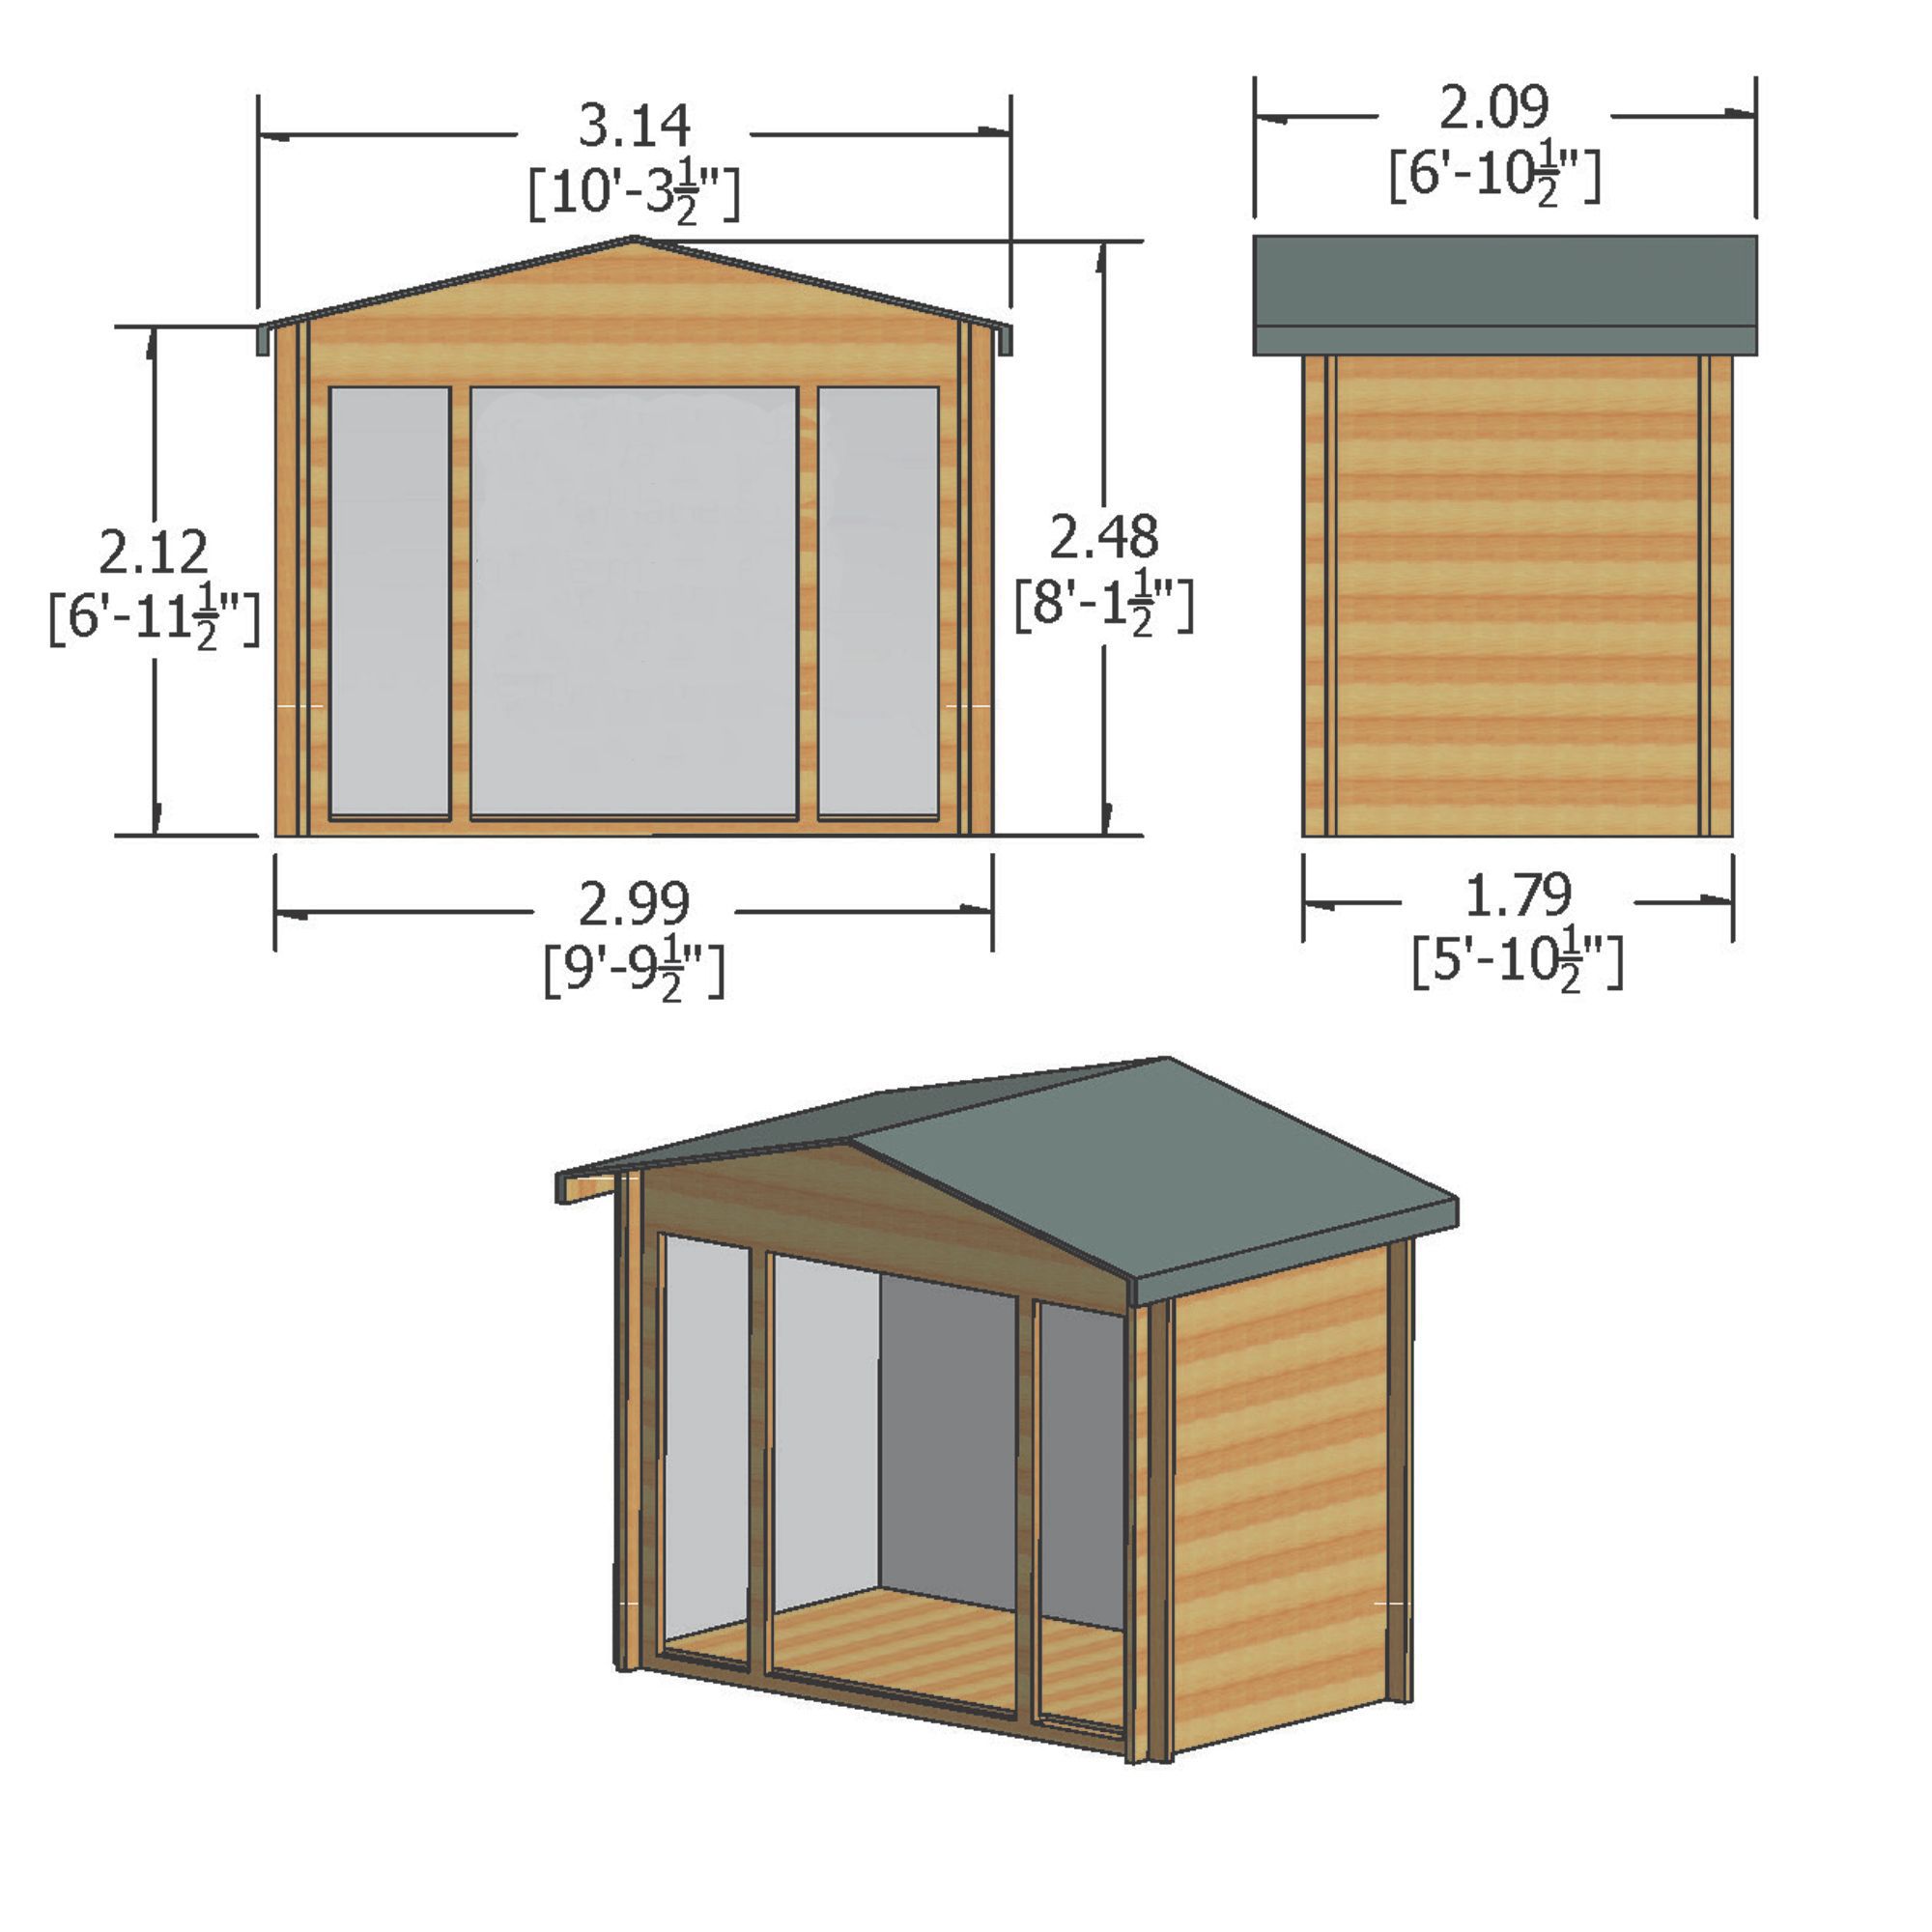 Shire Epping 10x6 ft Toughened glass & 2 windows Apex Wooden Cabin - Assembly service included